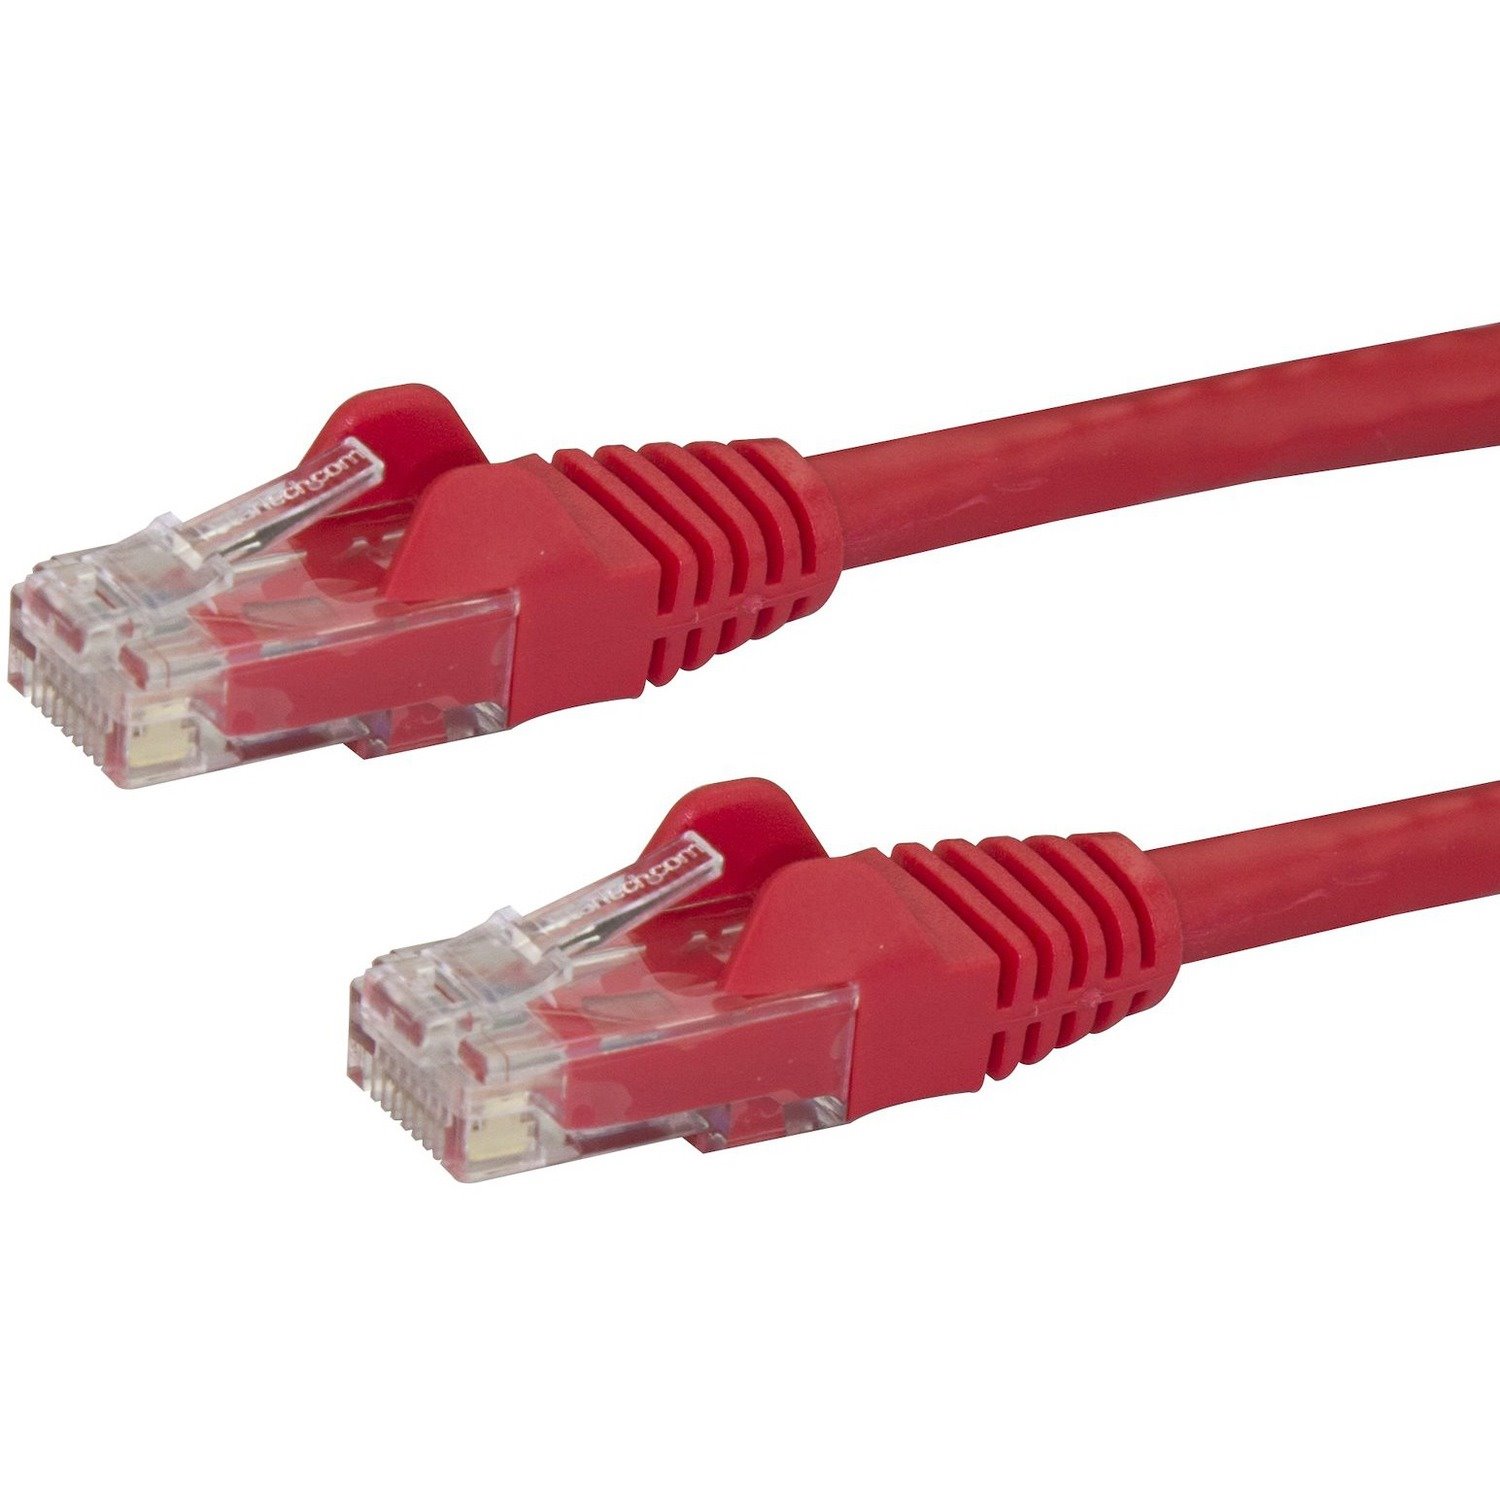 StarTech.com 12ft CAT6 Ethernet Cable - Red Snagless Gigabit - 100W PoE UTP 650MHz Category 6 Patch Cord UL Certified Wiring/TIA